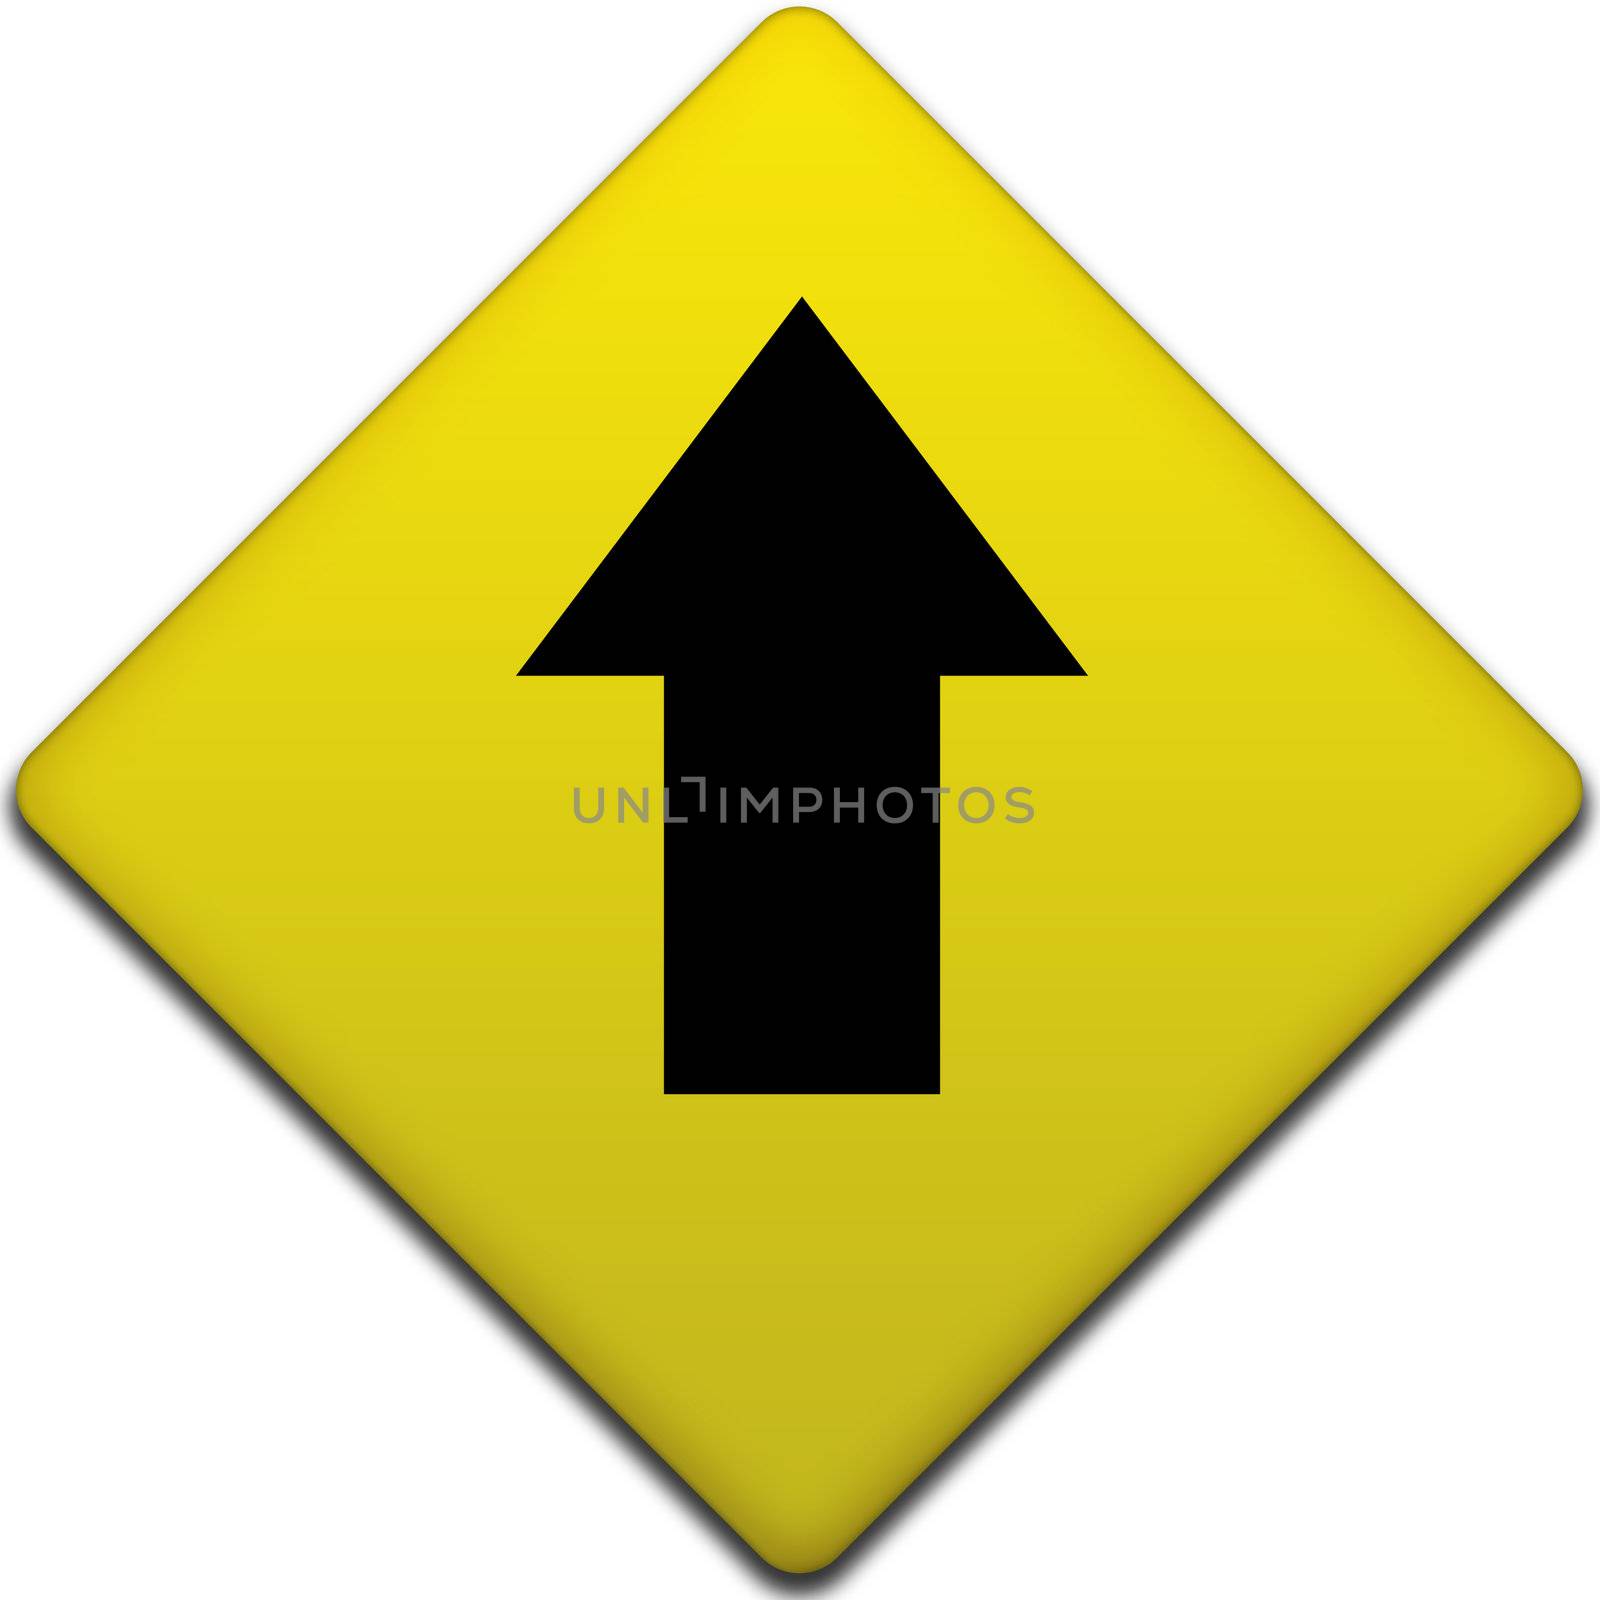 black arrow pointing up on a yellow road sign